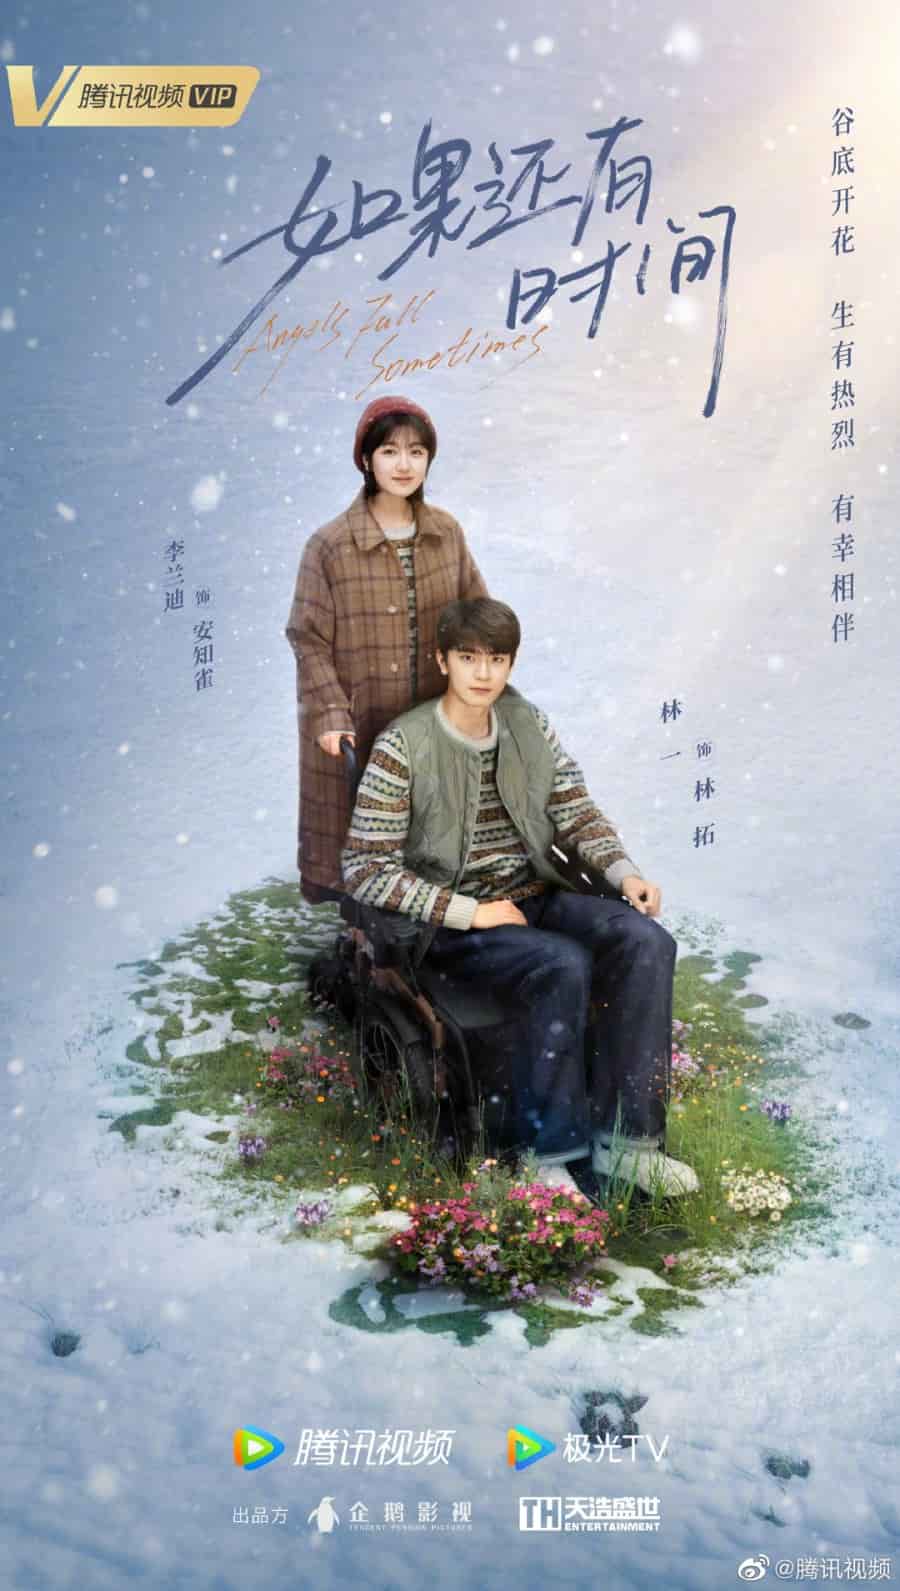 Angels Fall Sometimes - Sinopsis, Pemain, OST, Episode, Review